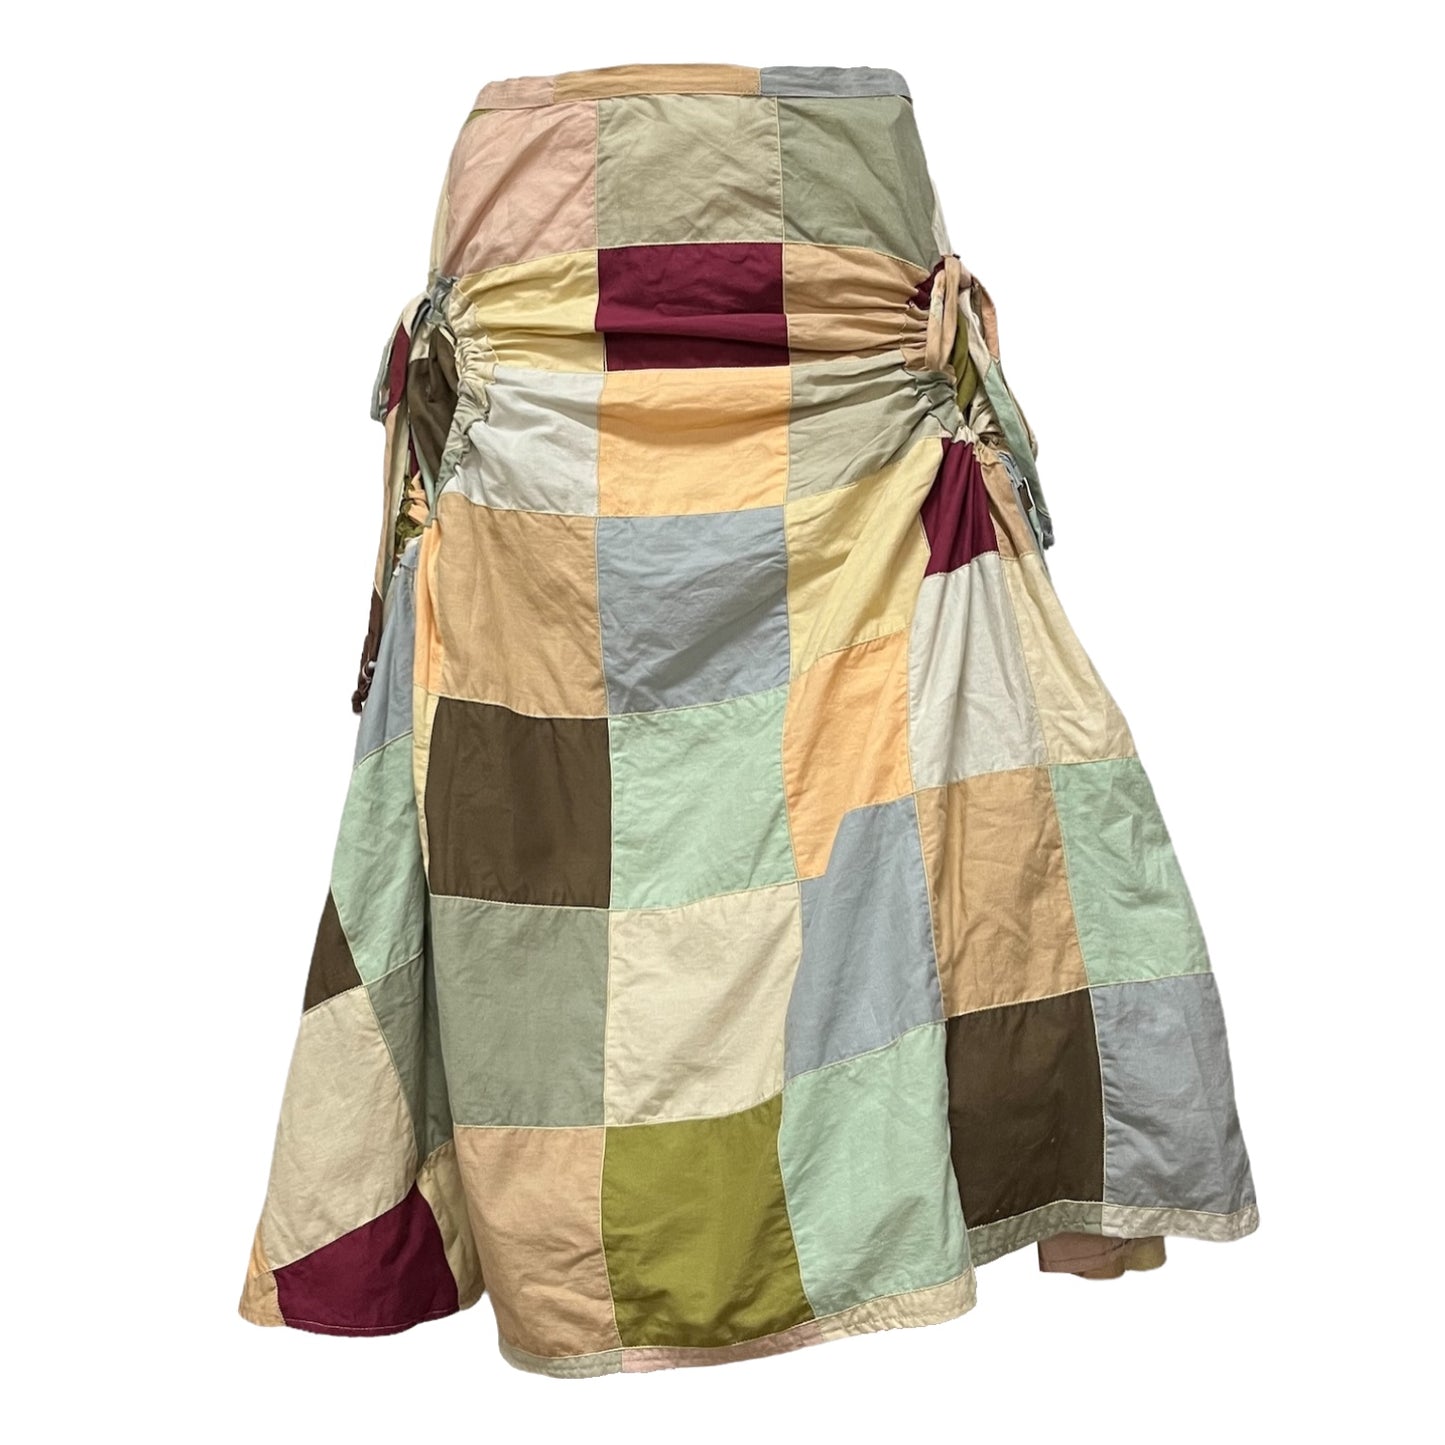 MARNI Fall Winter 2002 Patchwork Scrunched Drawstring Skirt